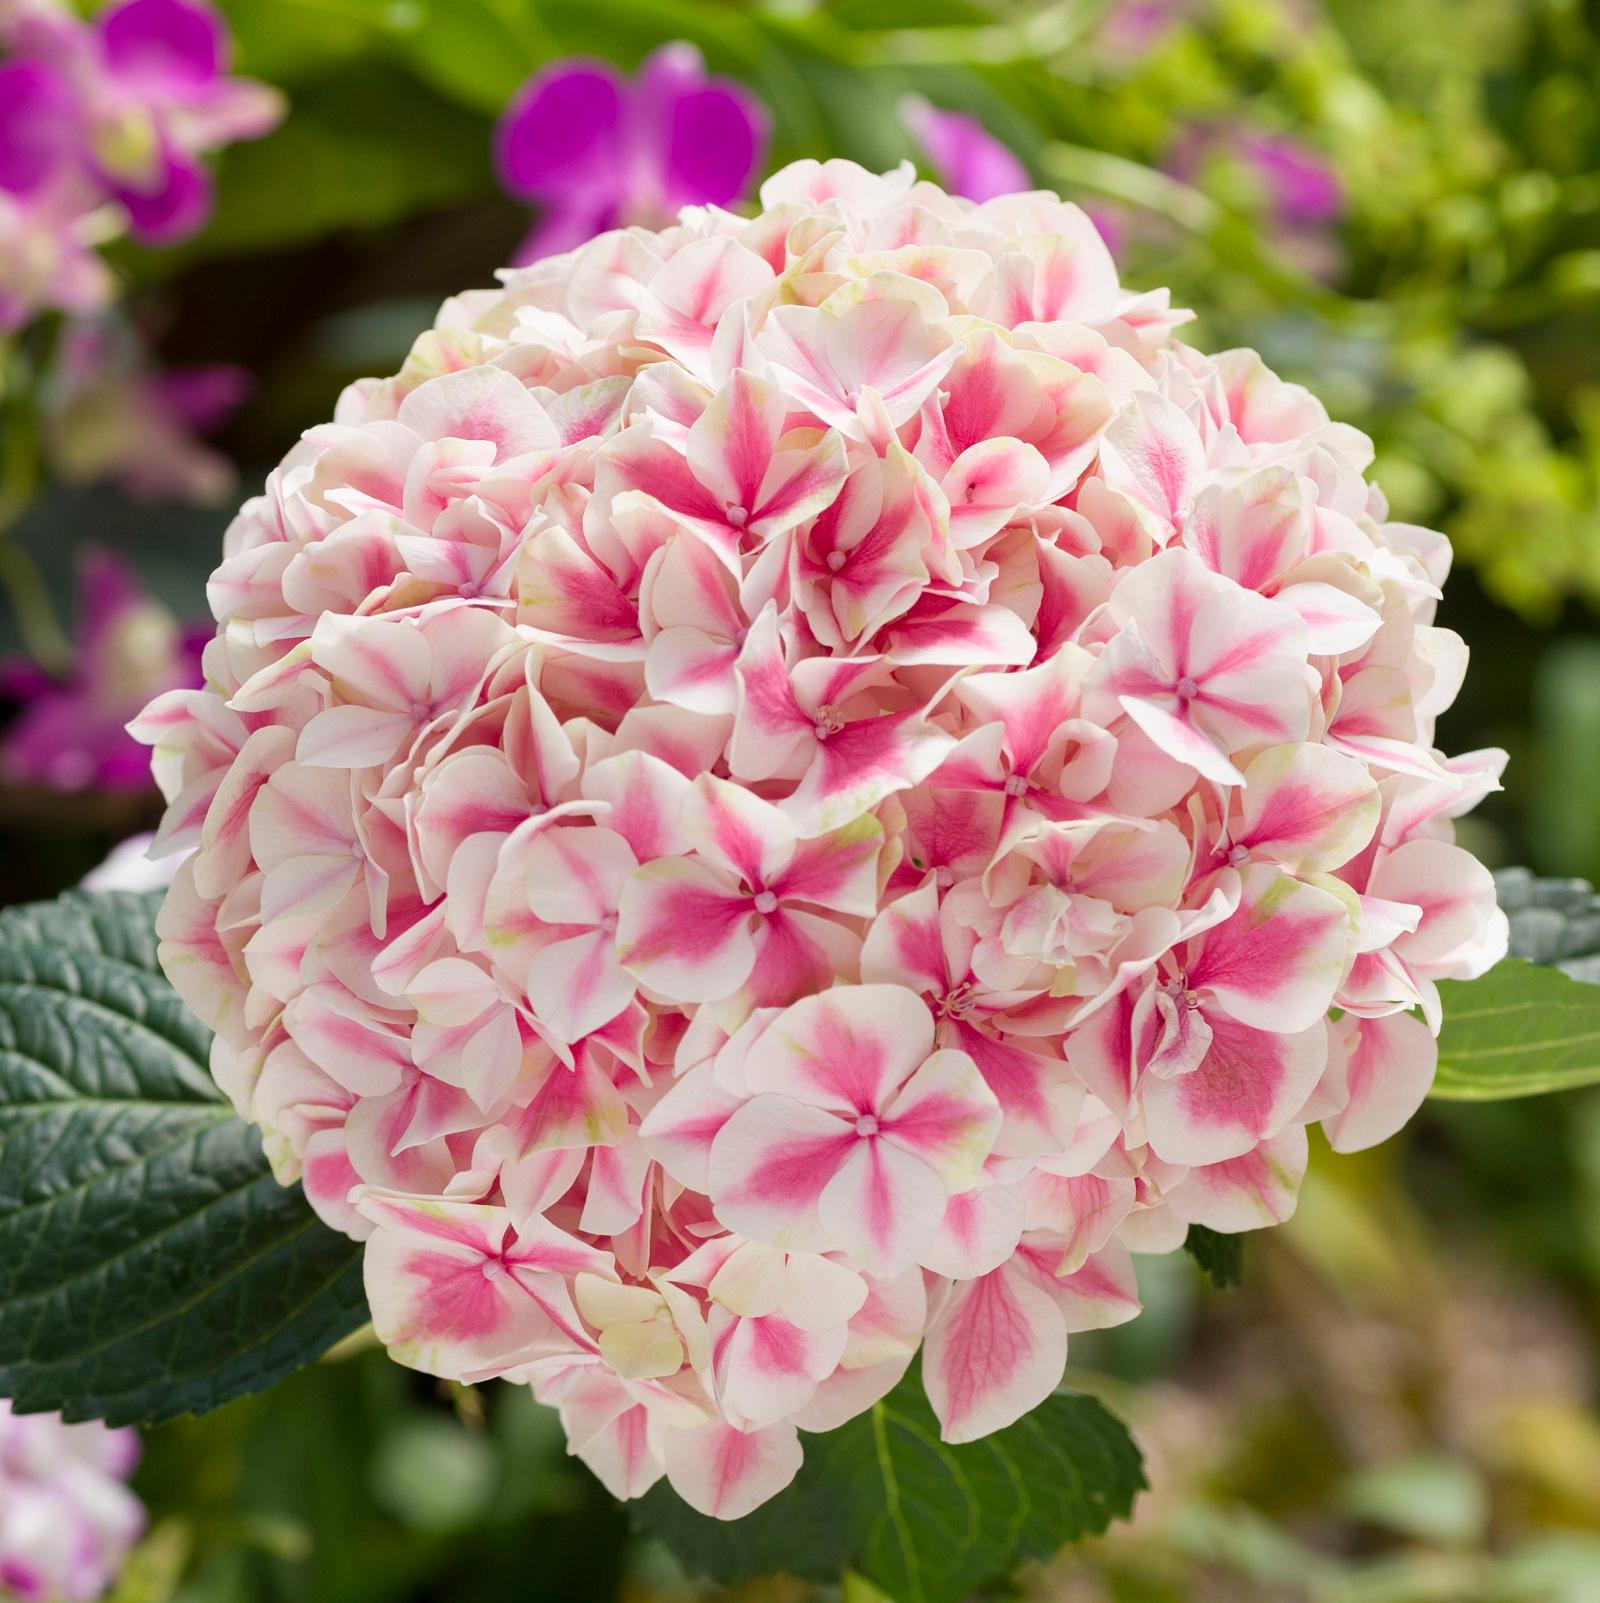 The Hong Kong Flower Show will be held from March 10 to 19 in Victoria Park, with the gorgeous and uniquely grown hydrangea as the theme flower. The hydrangea is renowned for its glamorous large flowers and splendid colours in full bloom.
